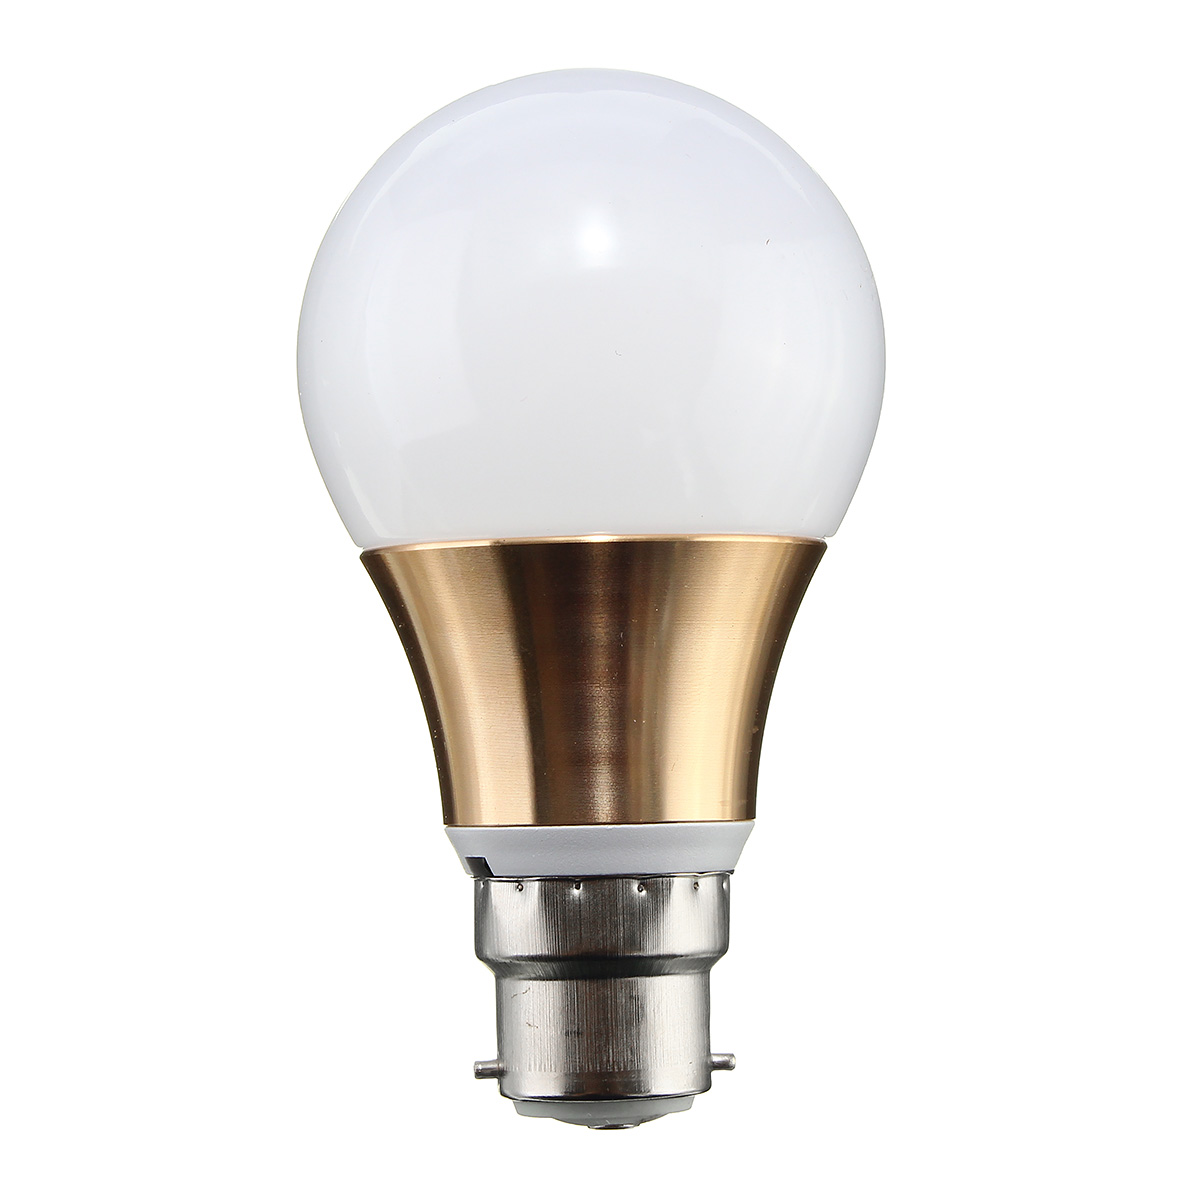 E27-B22-5W-5730-SMD-450LM-LED-Globe-Light-Bulb-Home-Lamp-Decoration-Non-dimmable-AC85-265V-1145768-2